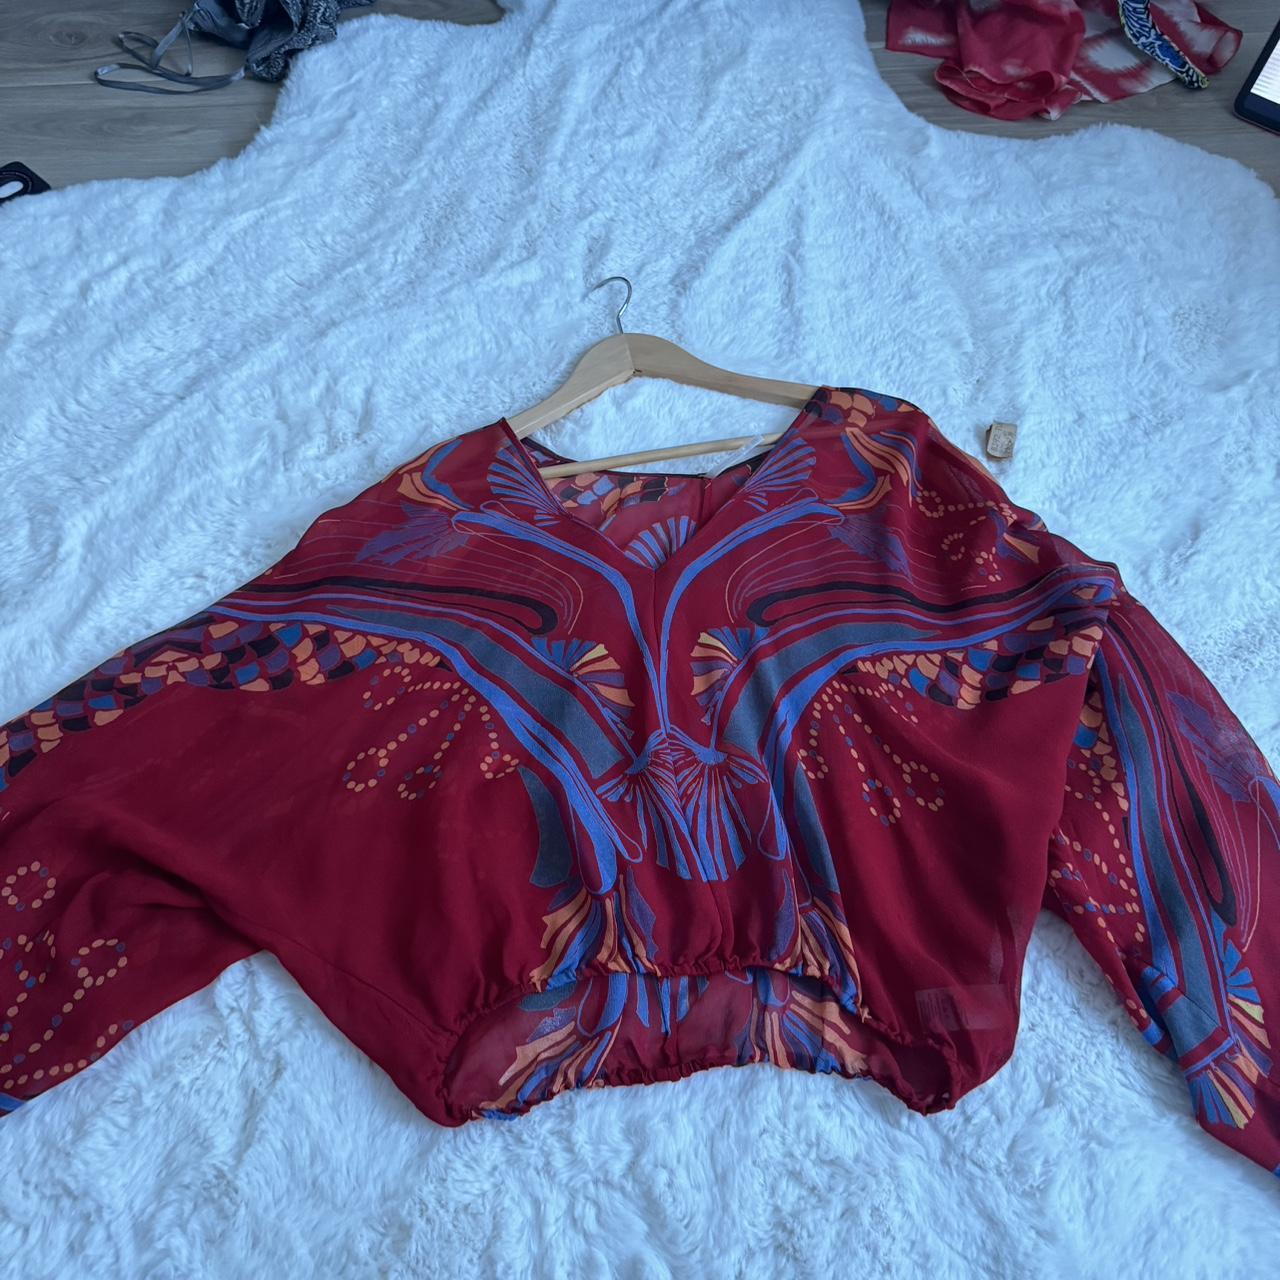 Free People Red and Blue Blouse - Depop